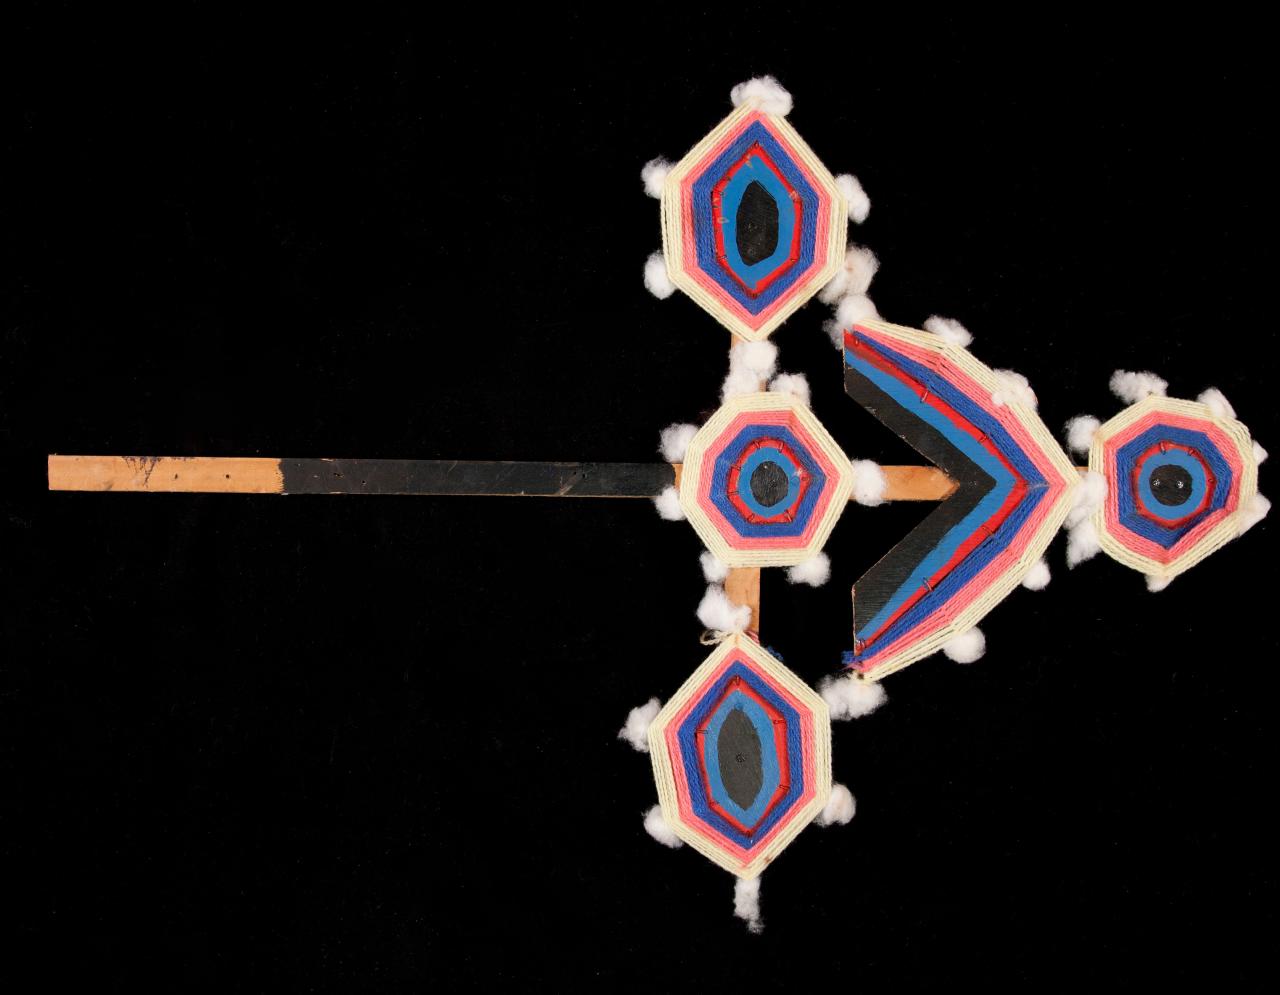 A ceremonial wooden object in the shape of an arrow painted pink, purple and white